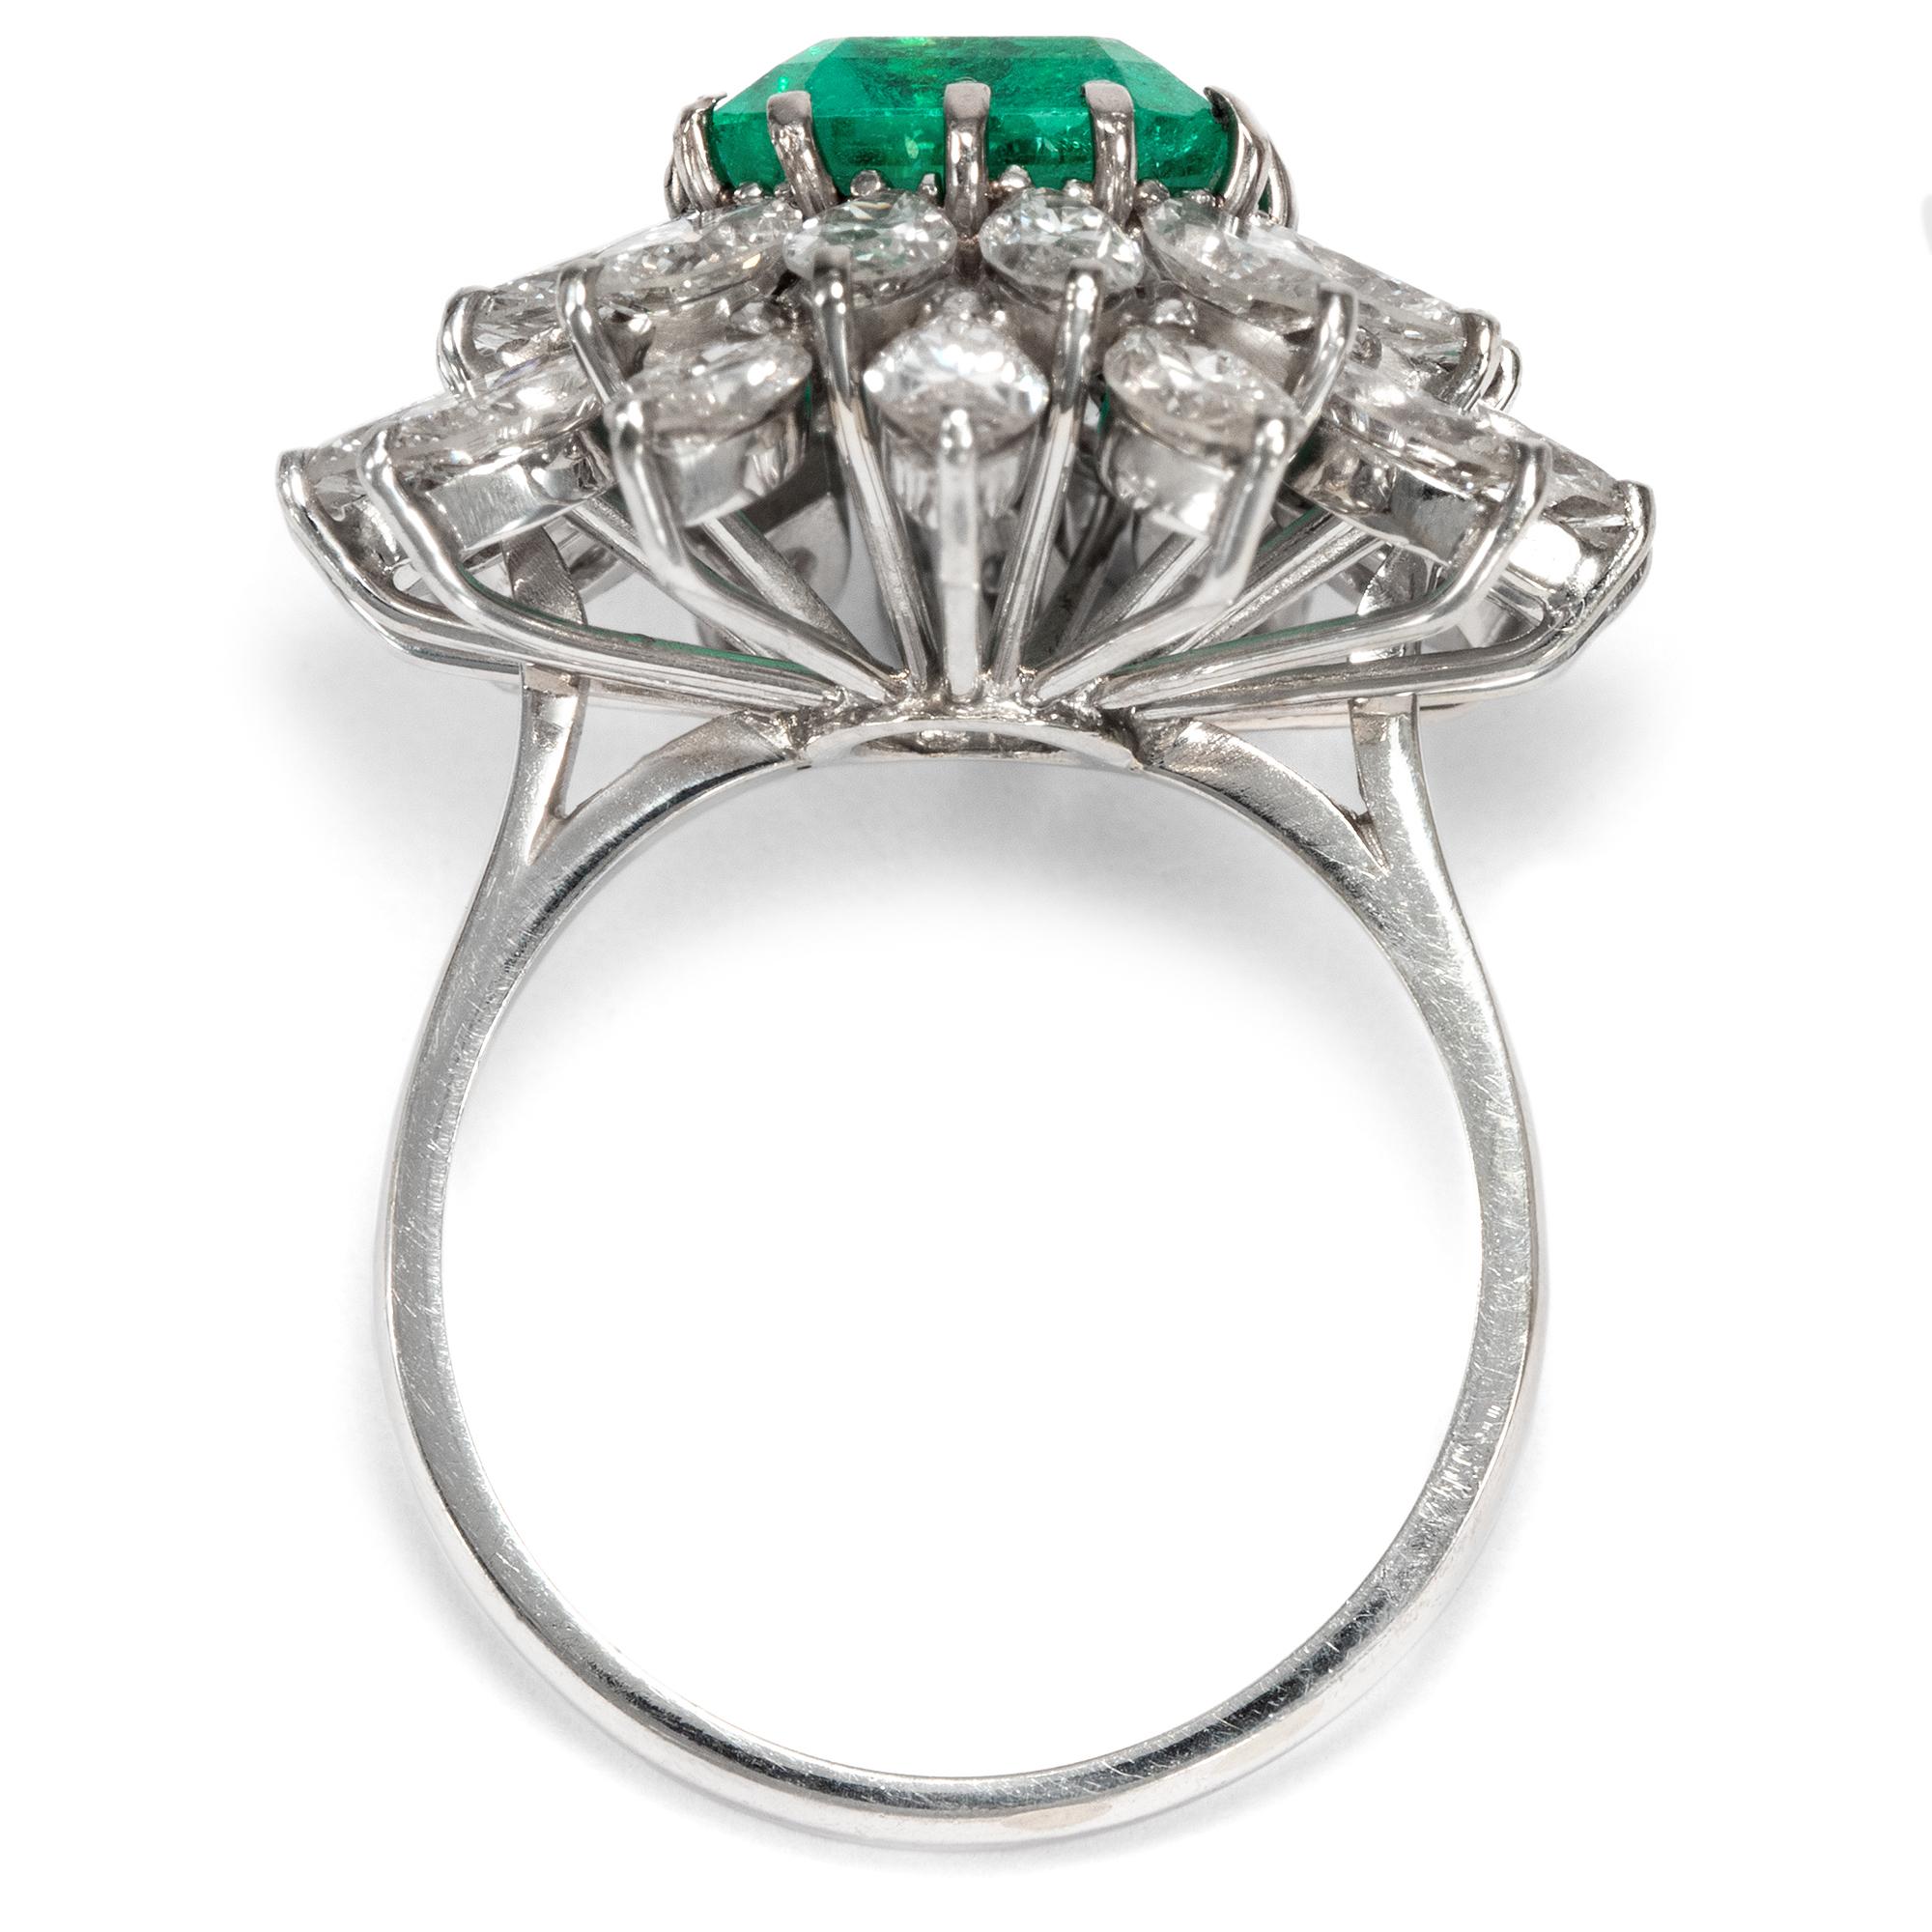 Women's or Men's Vintage circa 1970 Certified 3.62 Carat Emerald and 4.48 Ct Diamond Cluster Ring